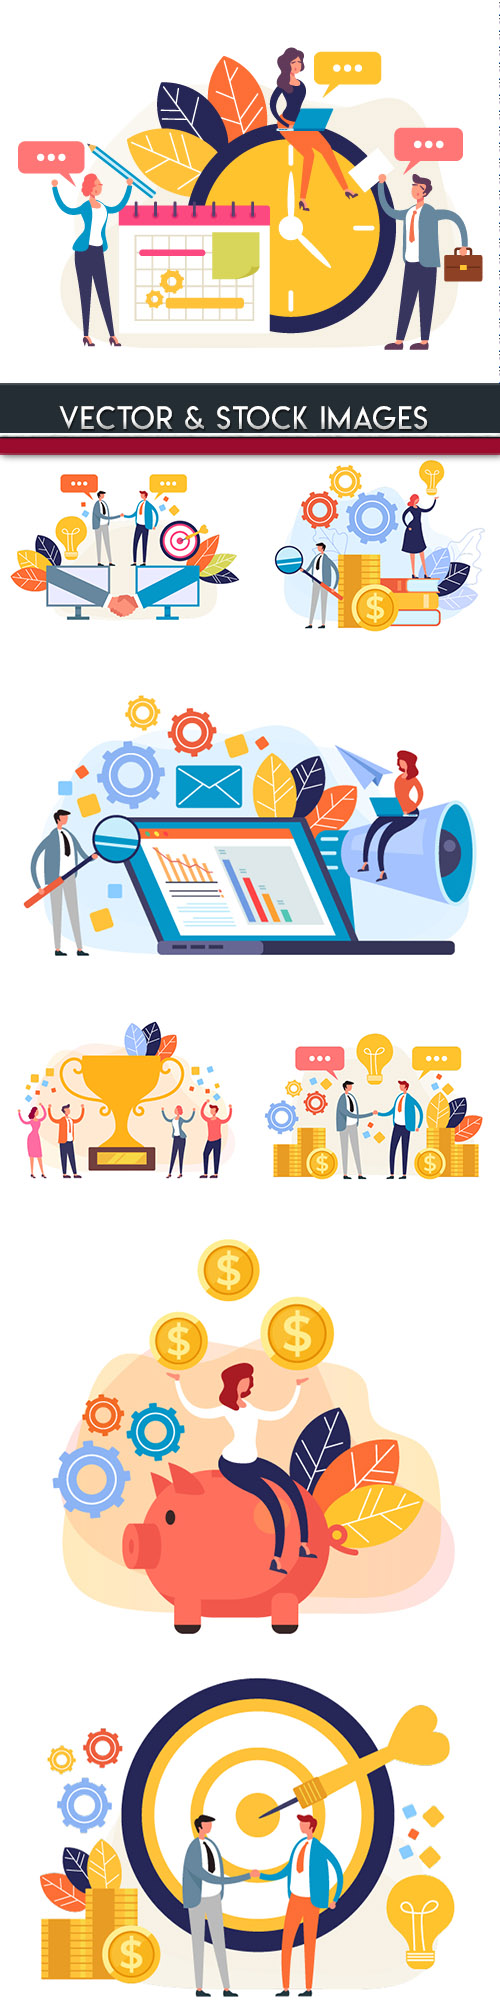 People business concept flat style design